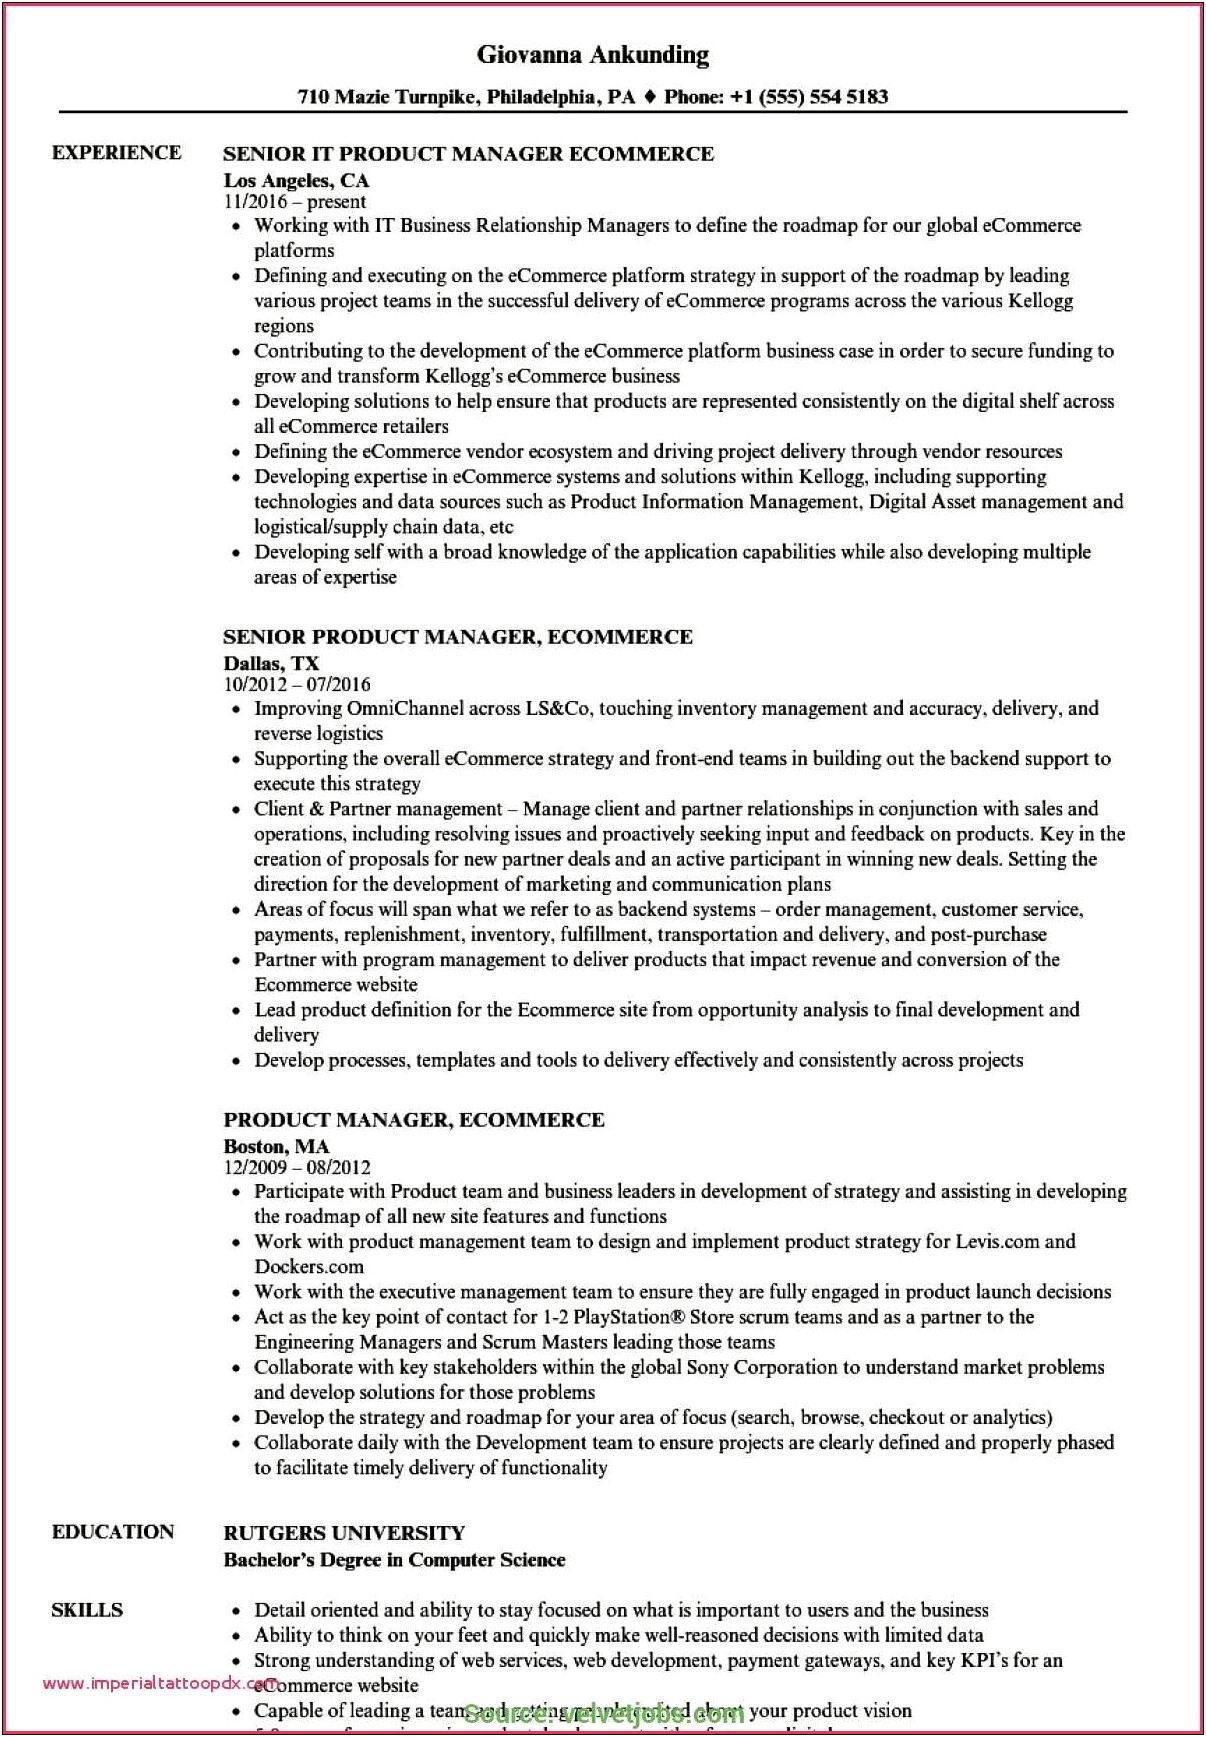 Resume Objective Statement Account Receivable